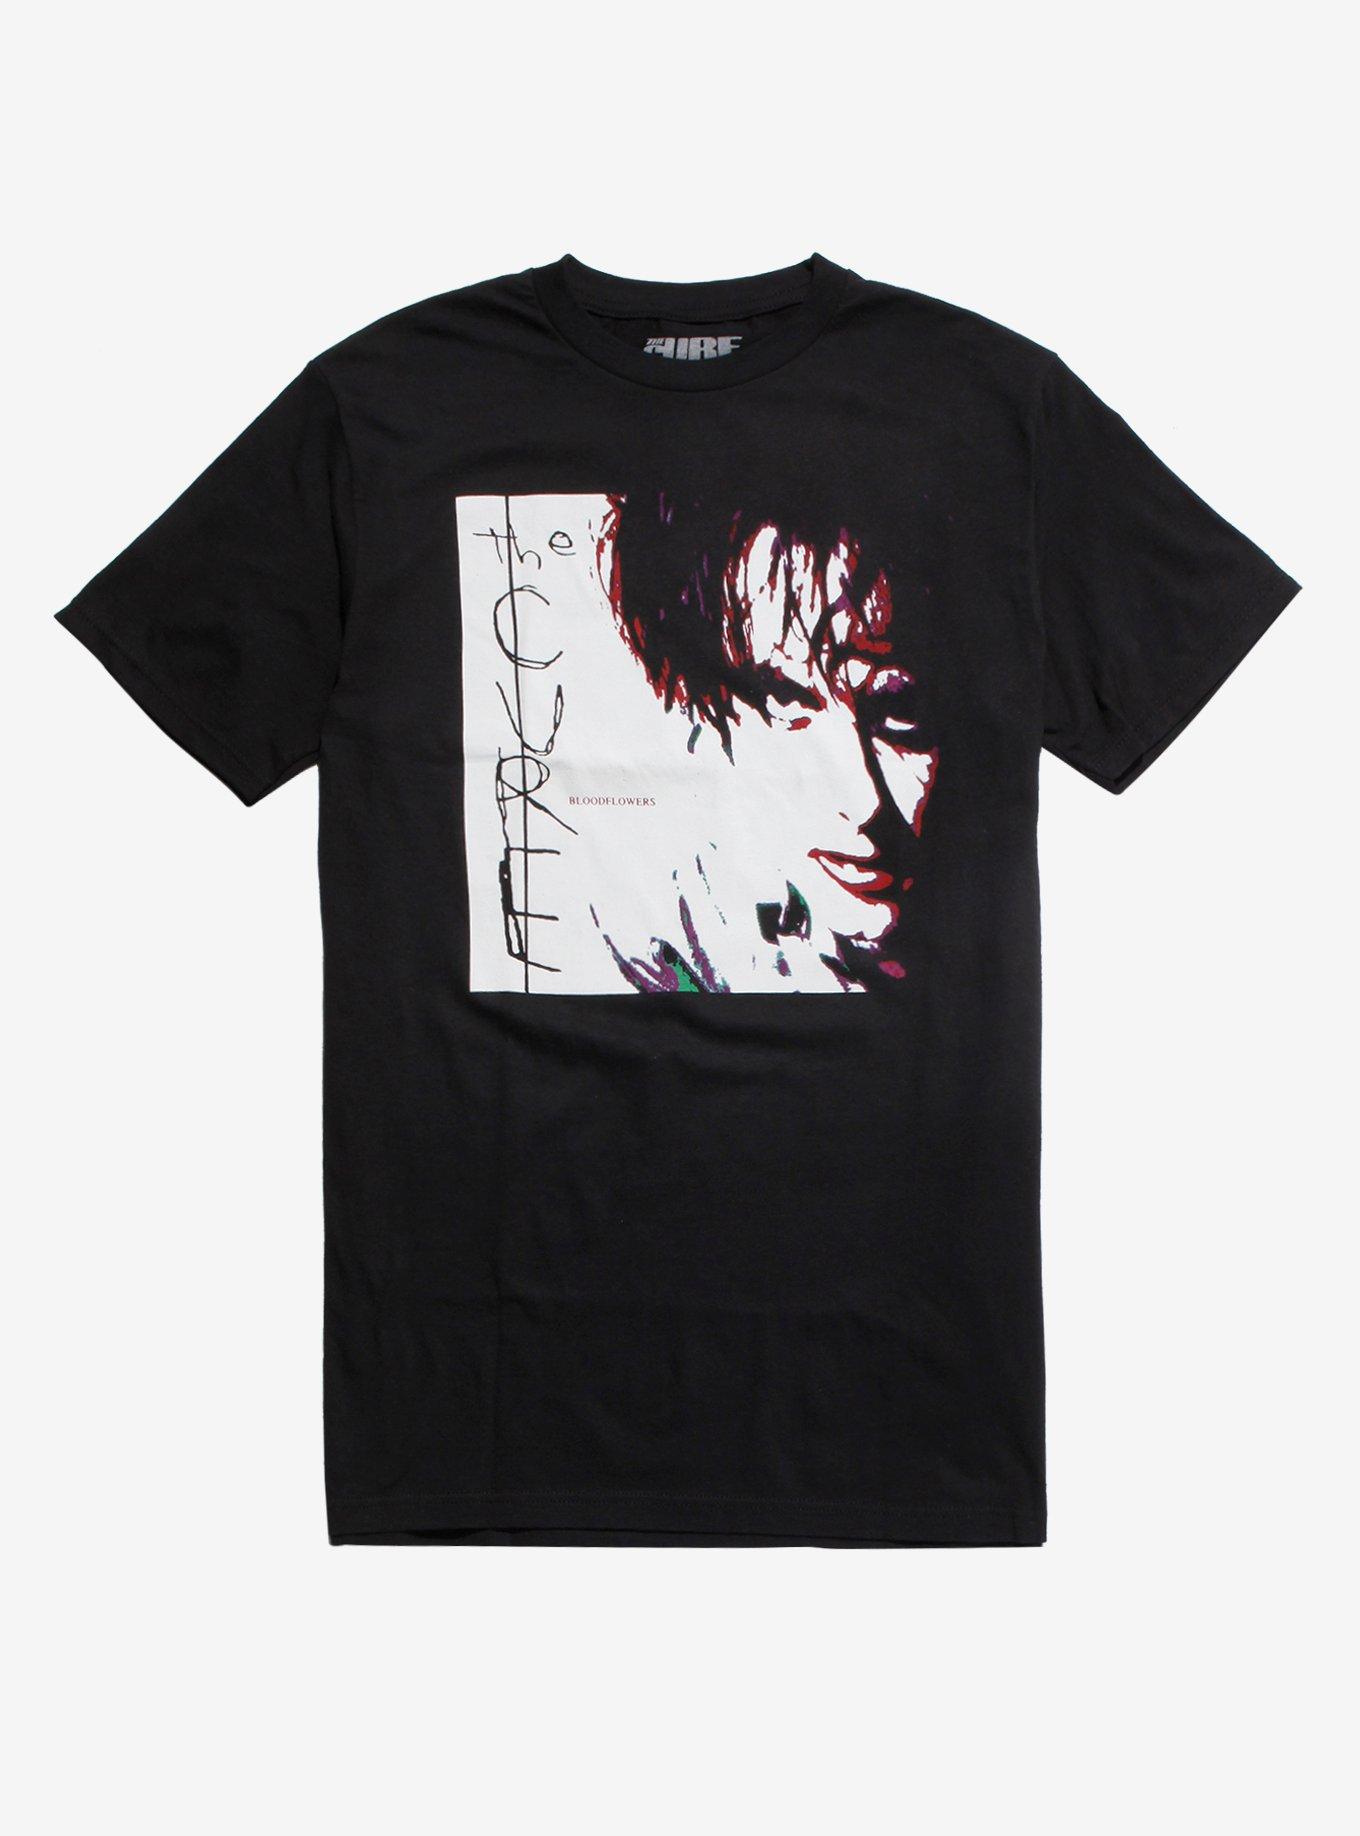 The Cure Bloodflowers T-Shirt | Hot Topic